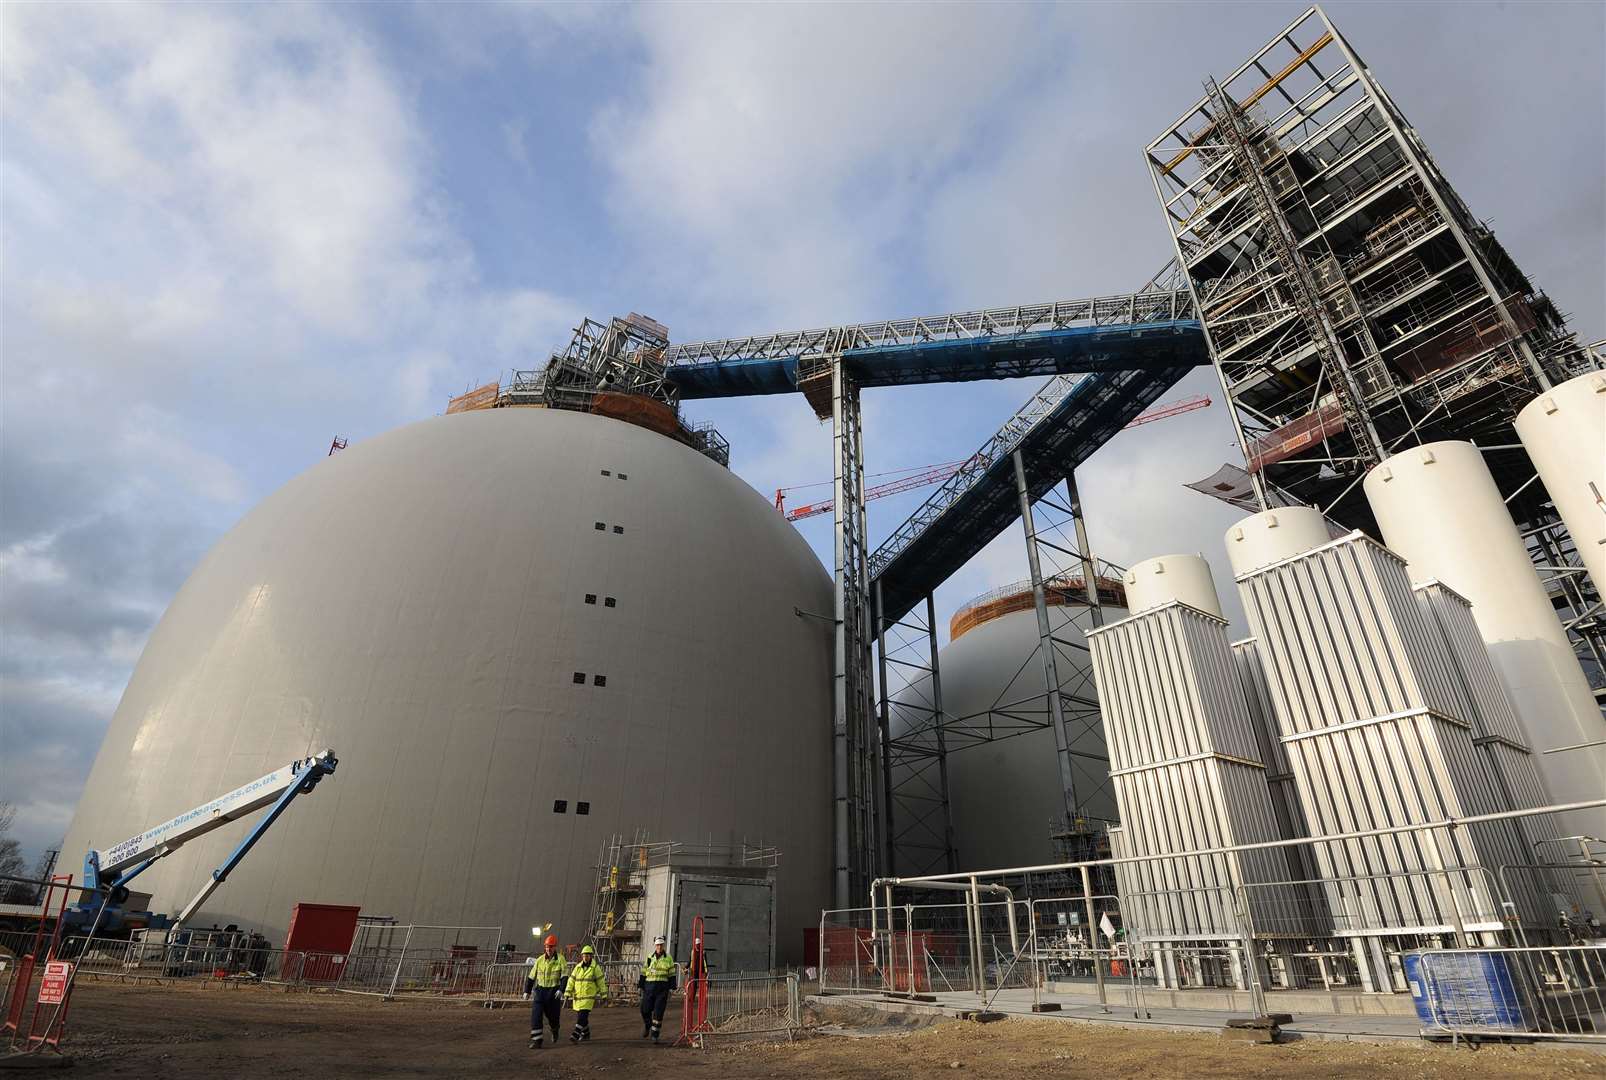 A biomass storage silo at Drax Power Station near Selby, North Yorkshire (Anna Gowthorpe/PA)